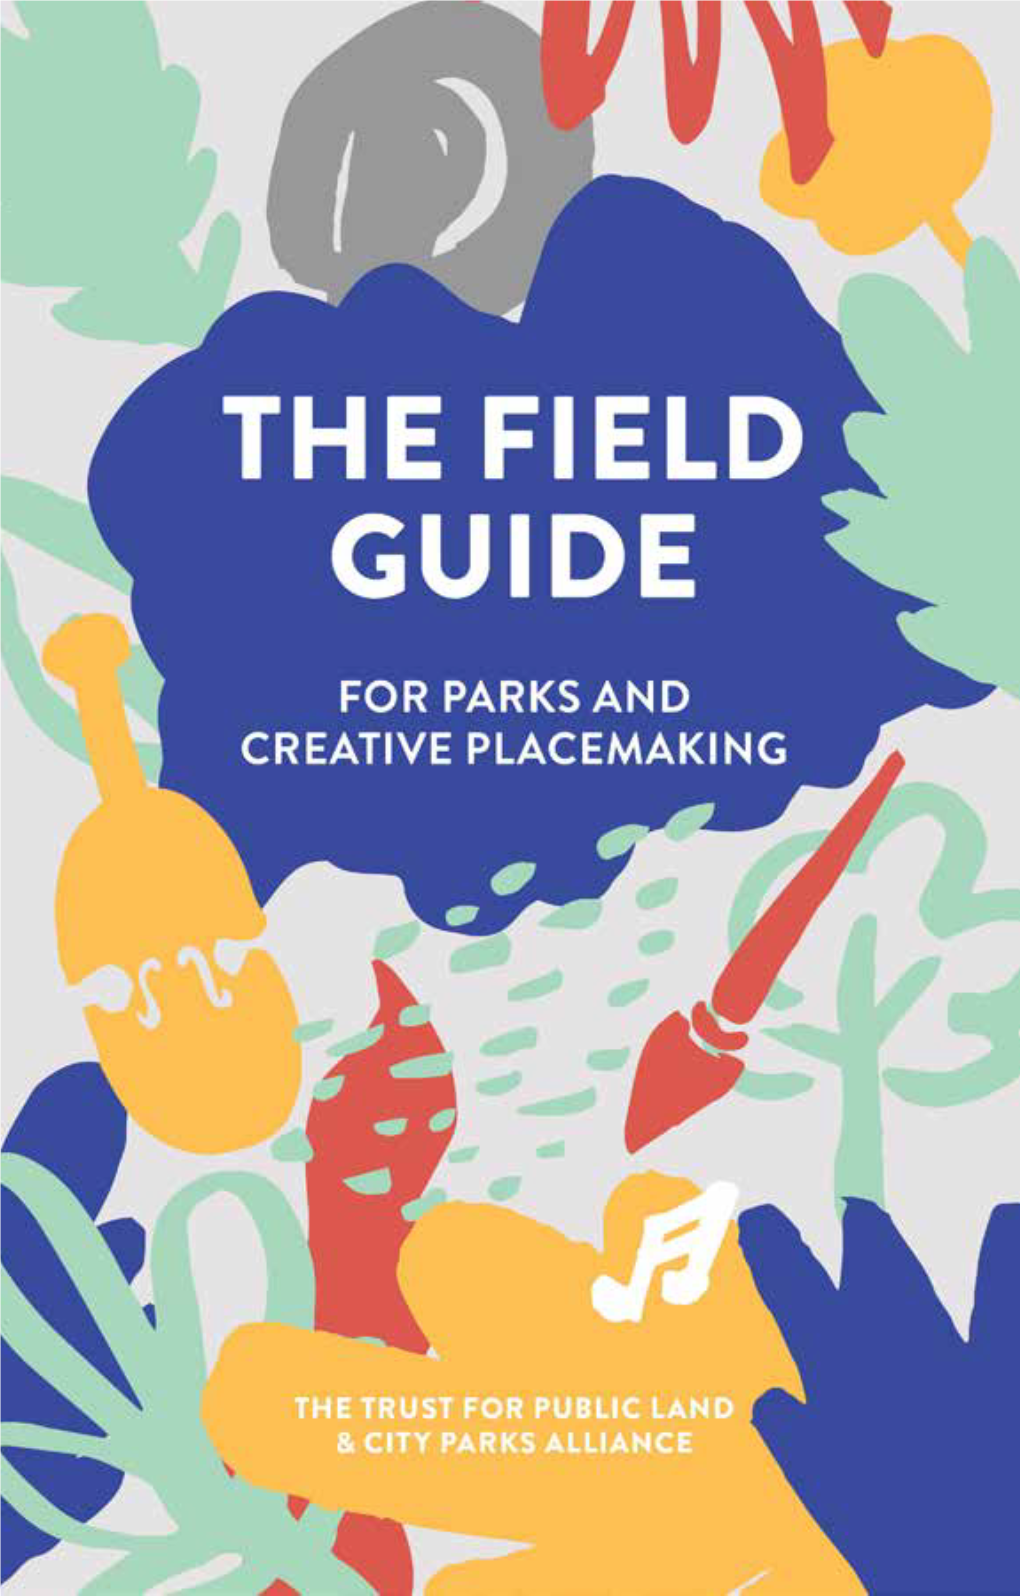 Field Guide for Creative Placemaking in Parks